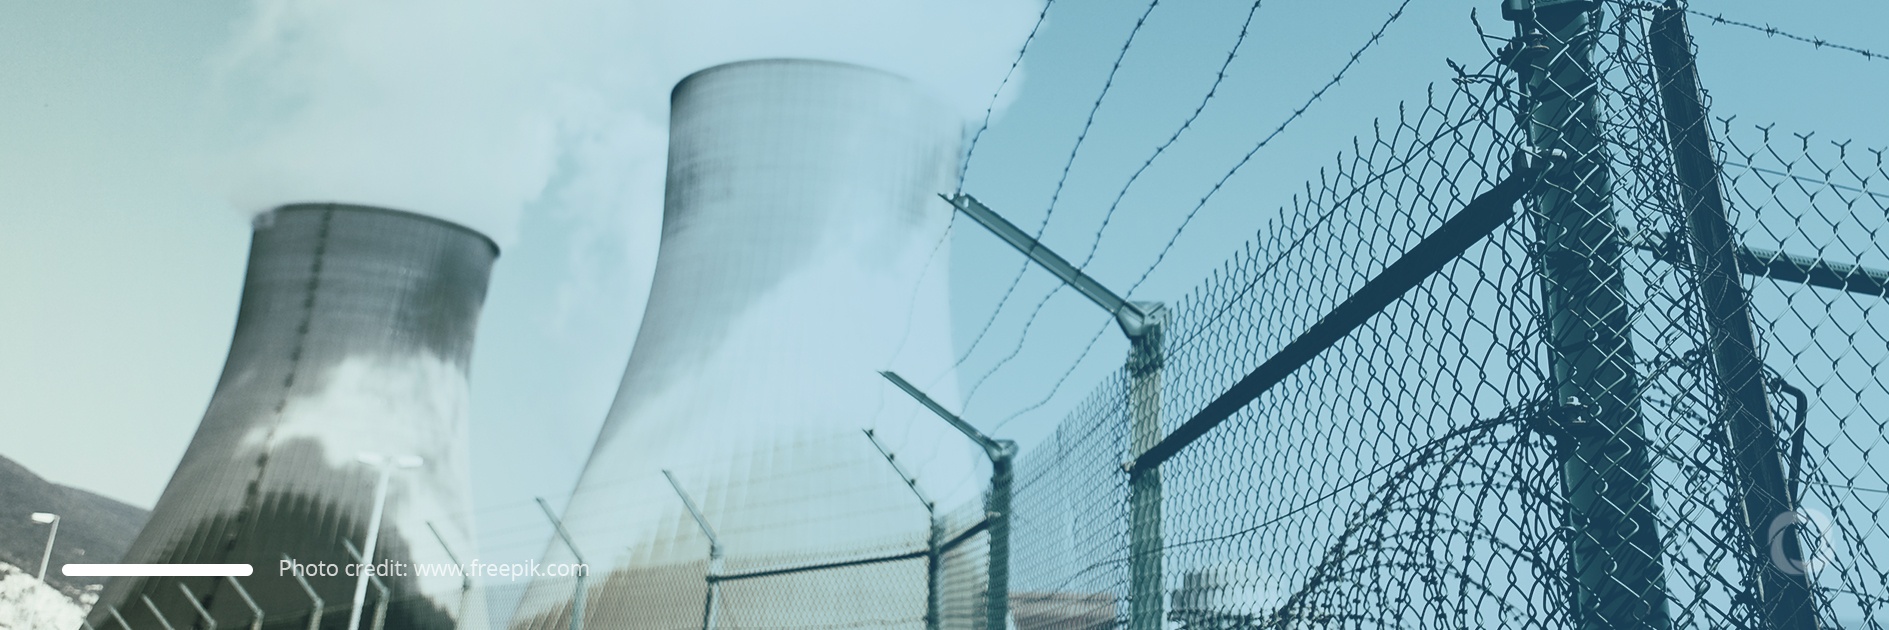 Pros and cons of nuclear energy